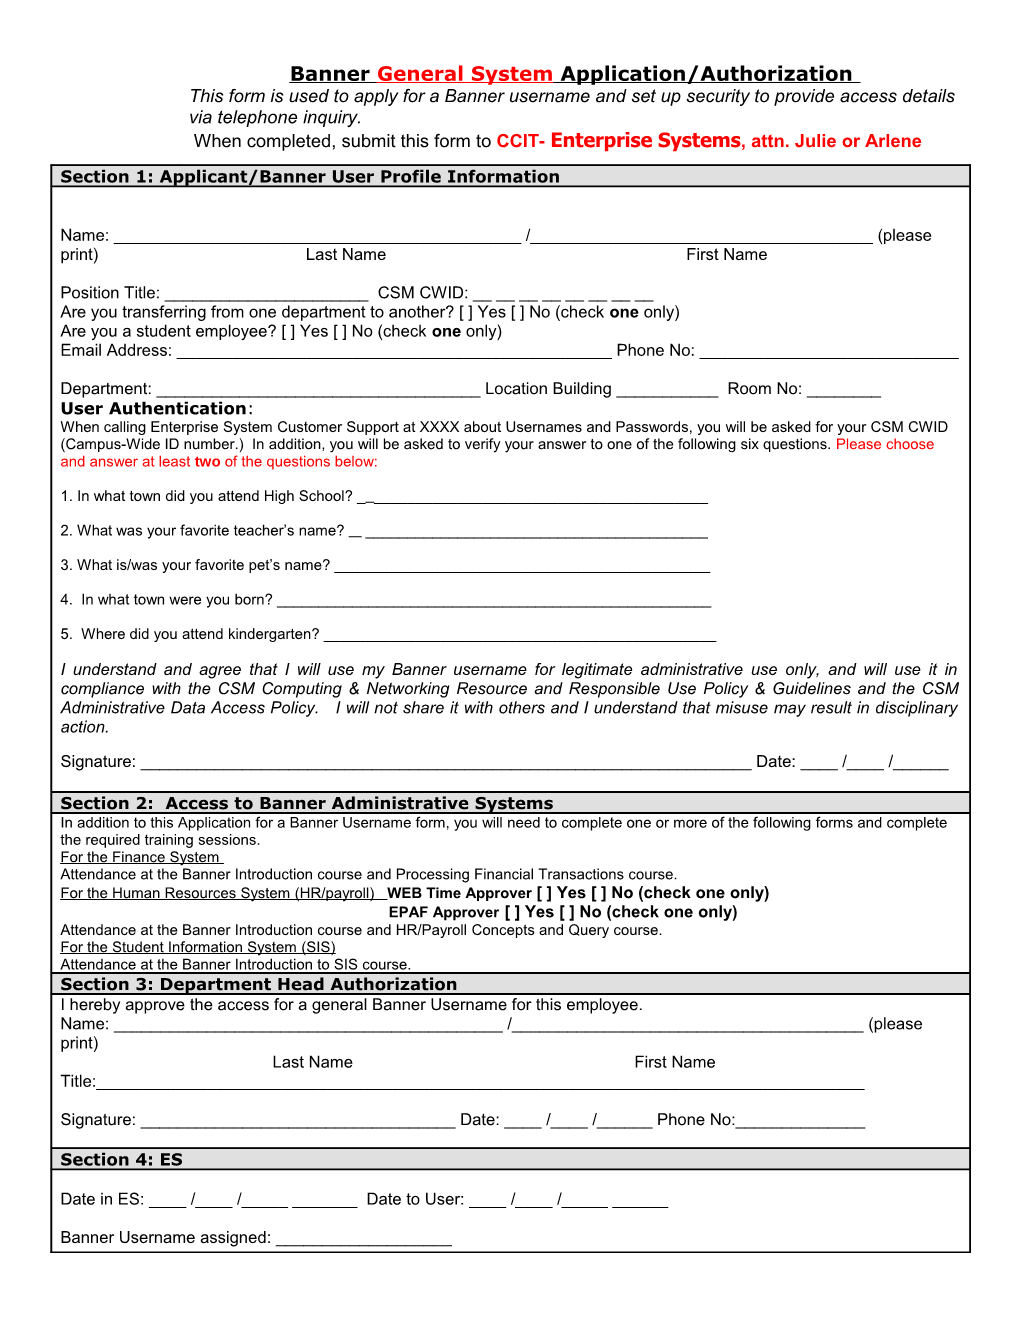 Once Completed, Send This Form to Ccit